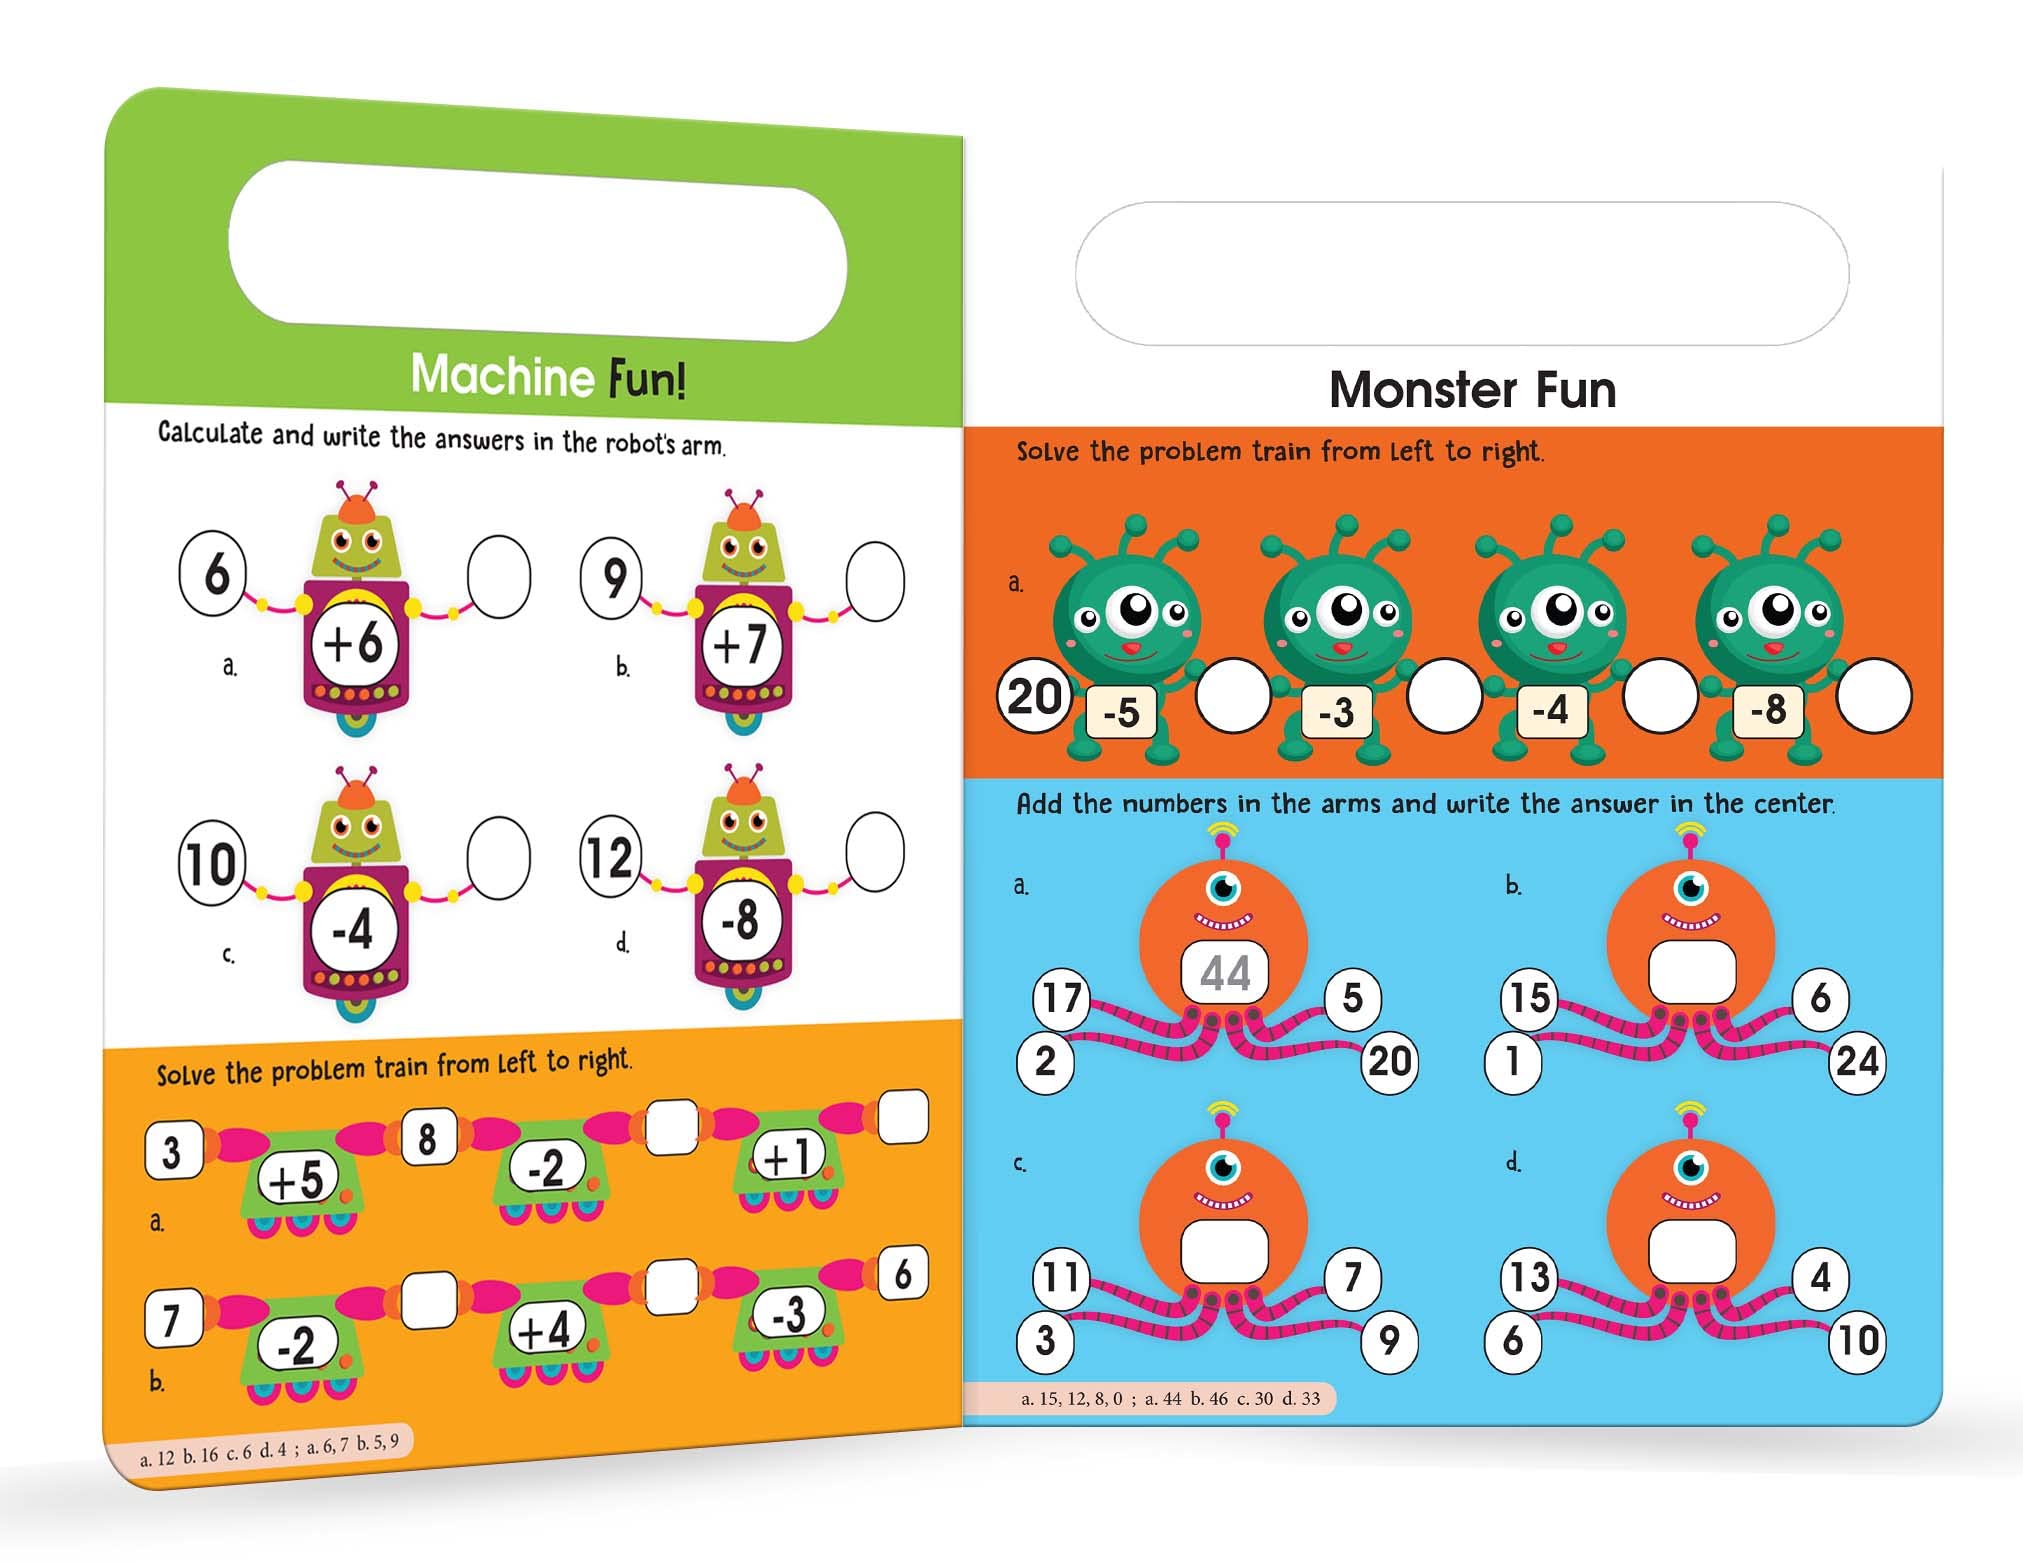 My Big Wipe And Clean Book of Add And Subtract for Kids Fun With Numbers [Board book] Wonder House Books